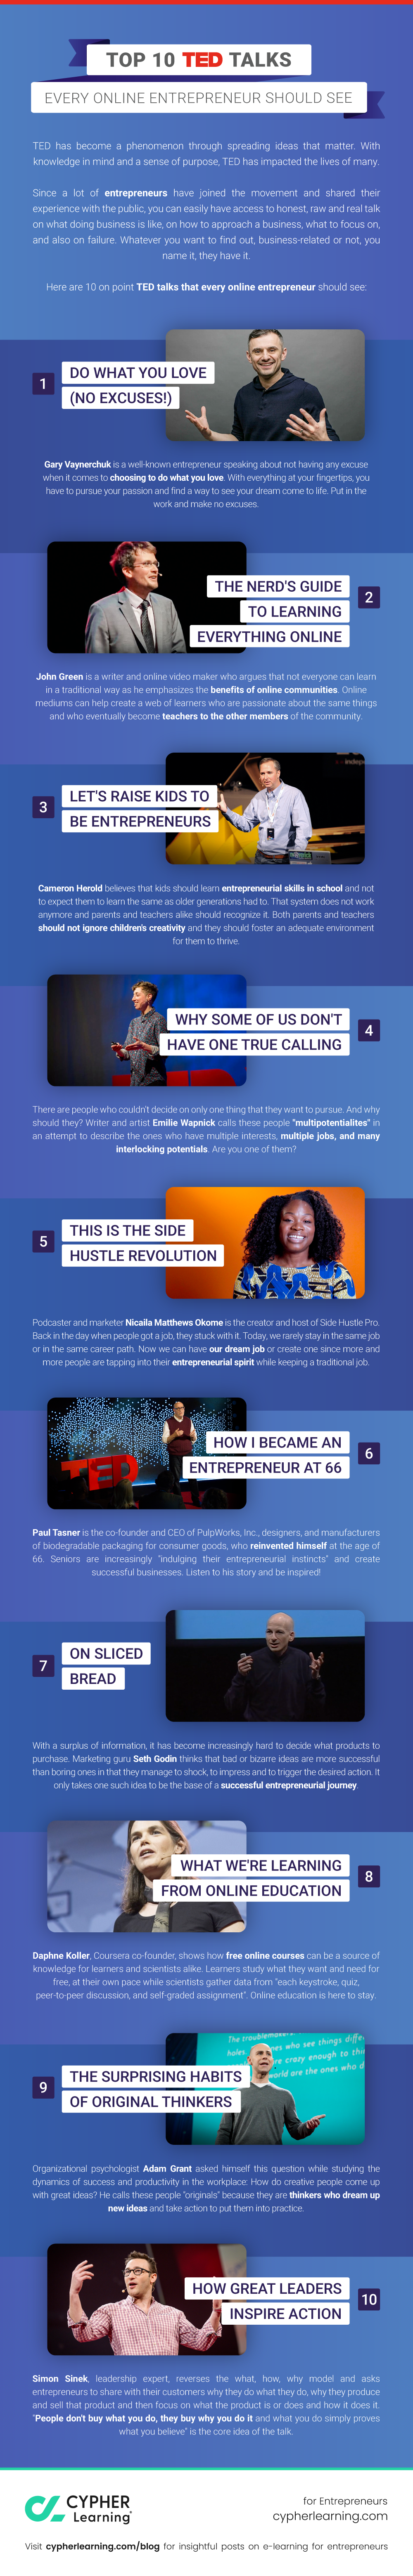 Top 10 TED Talks every online entrepreneur should see